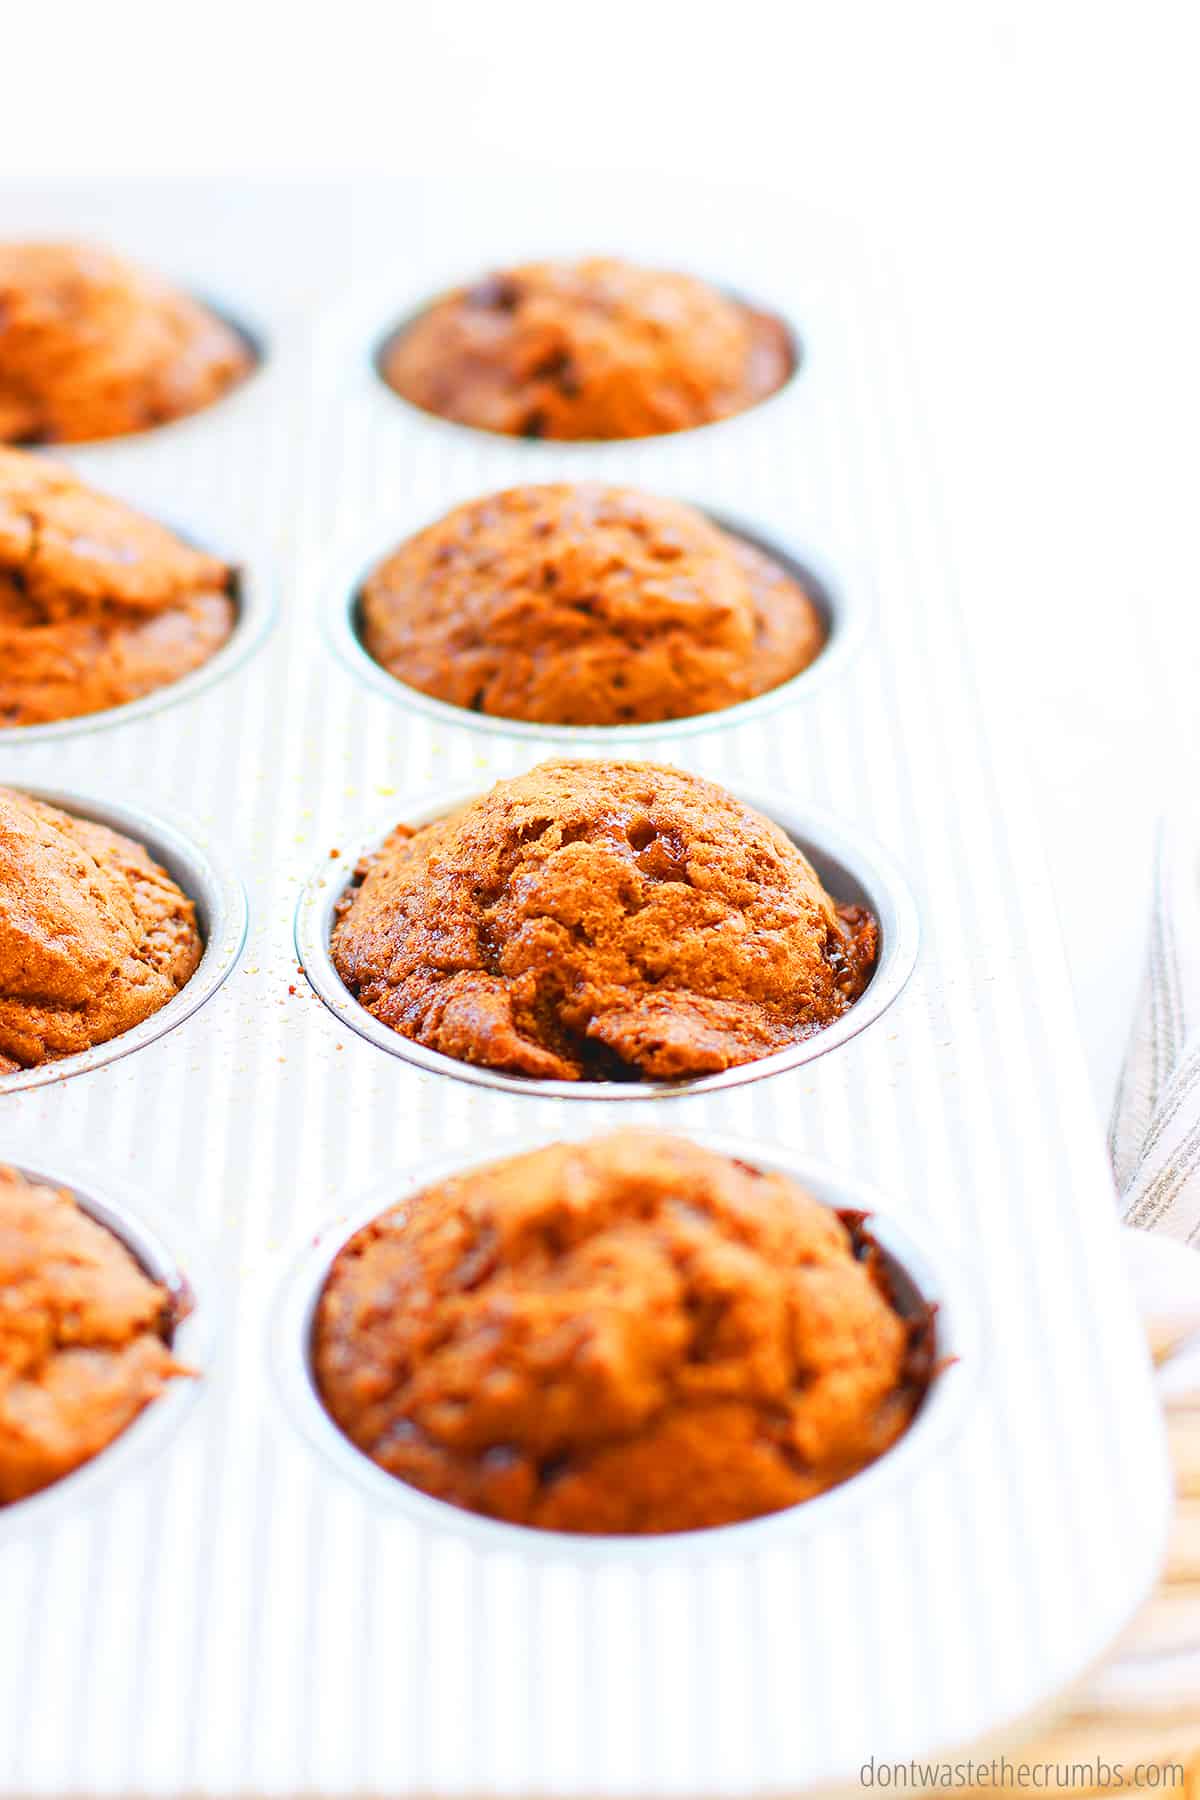 Freshly baked and golden brown applesauce muffins cool in the muffin tin before enjoying.